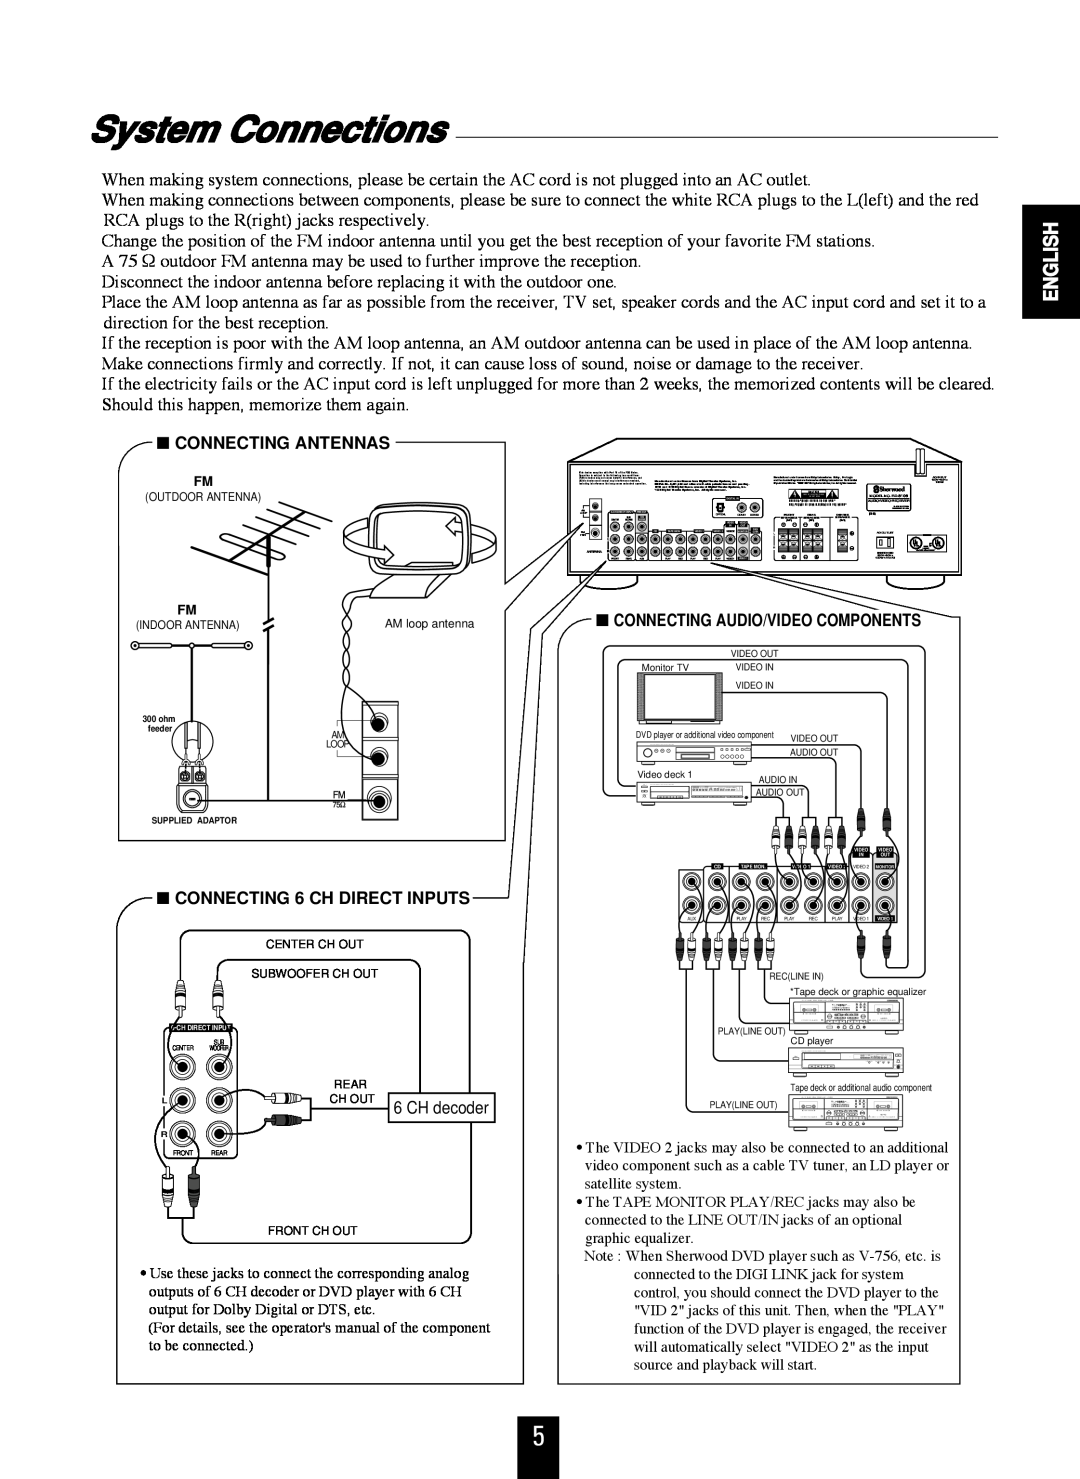 Sherwood RD-6106 manual System Connections, English, Connecting Antennas, CONNECTING 6 CH DIRECT INPUTS 